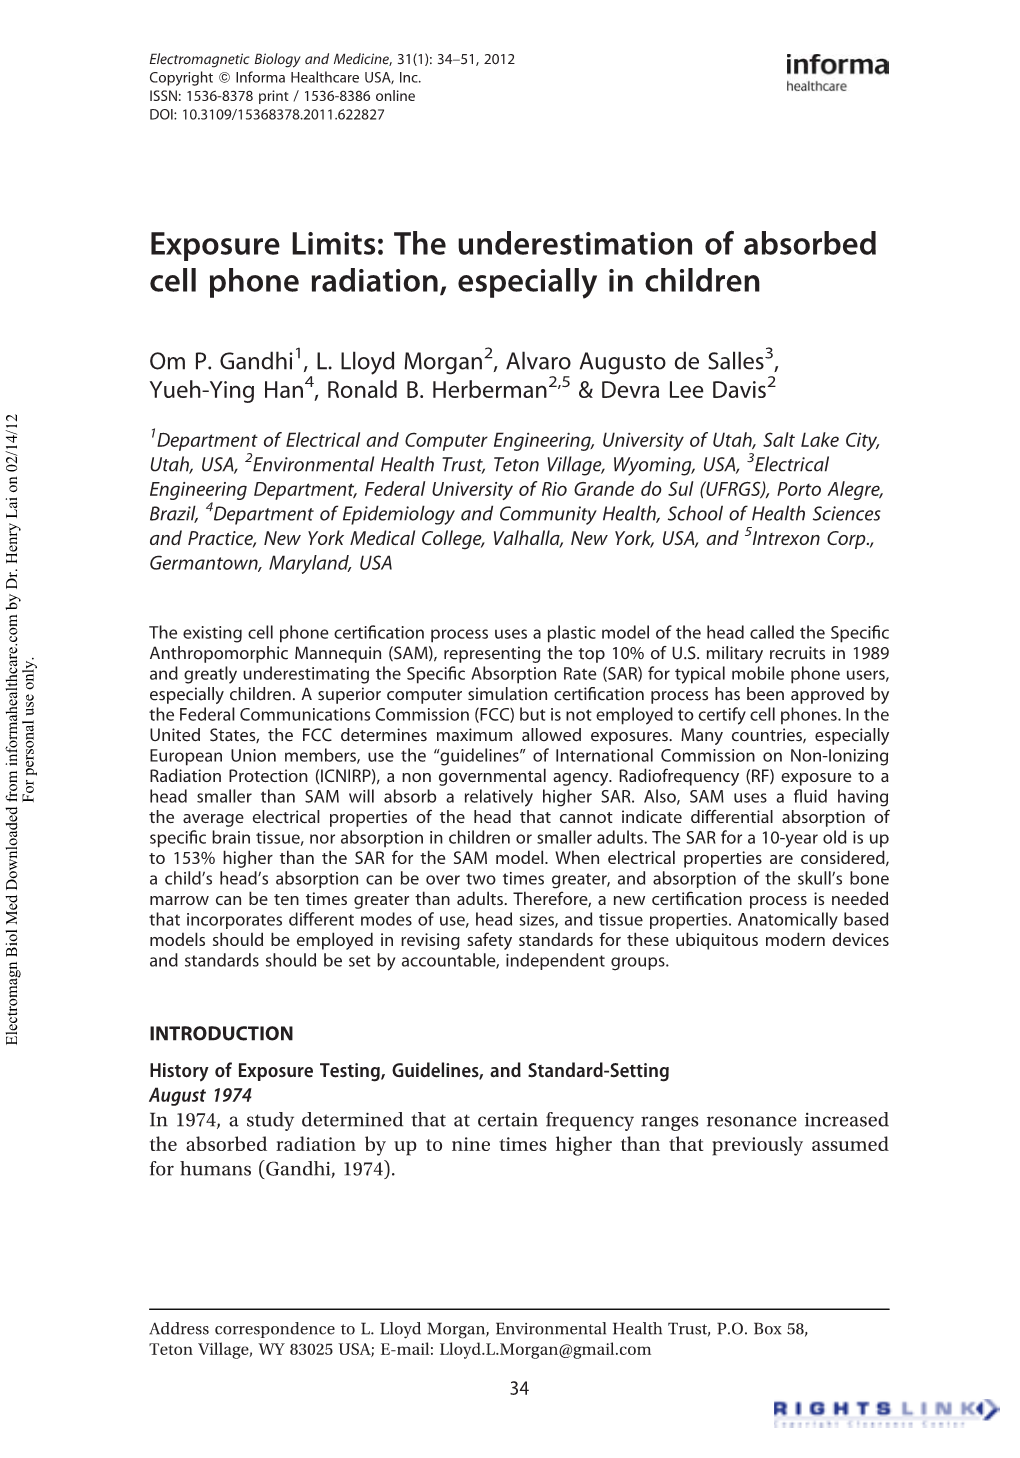 Exposure Limits: the Underestimation of Absorbed Cell Phone Radiation, Especially in Children